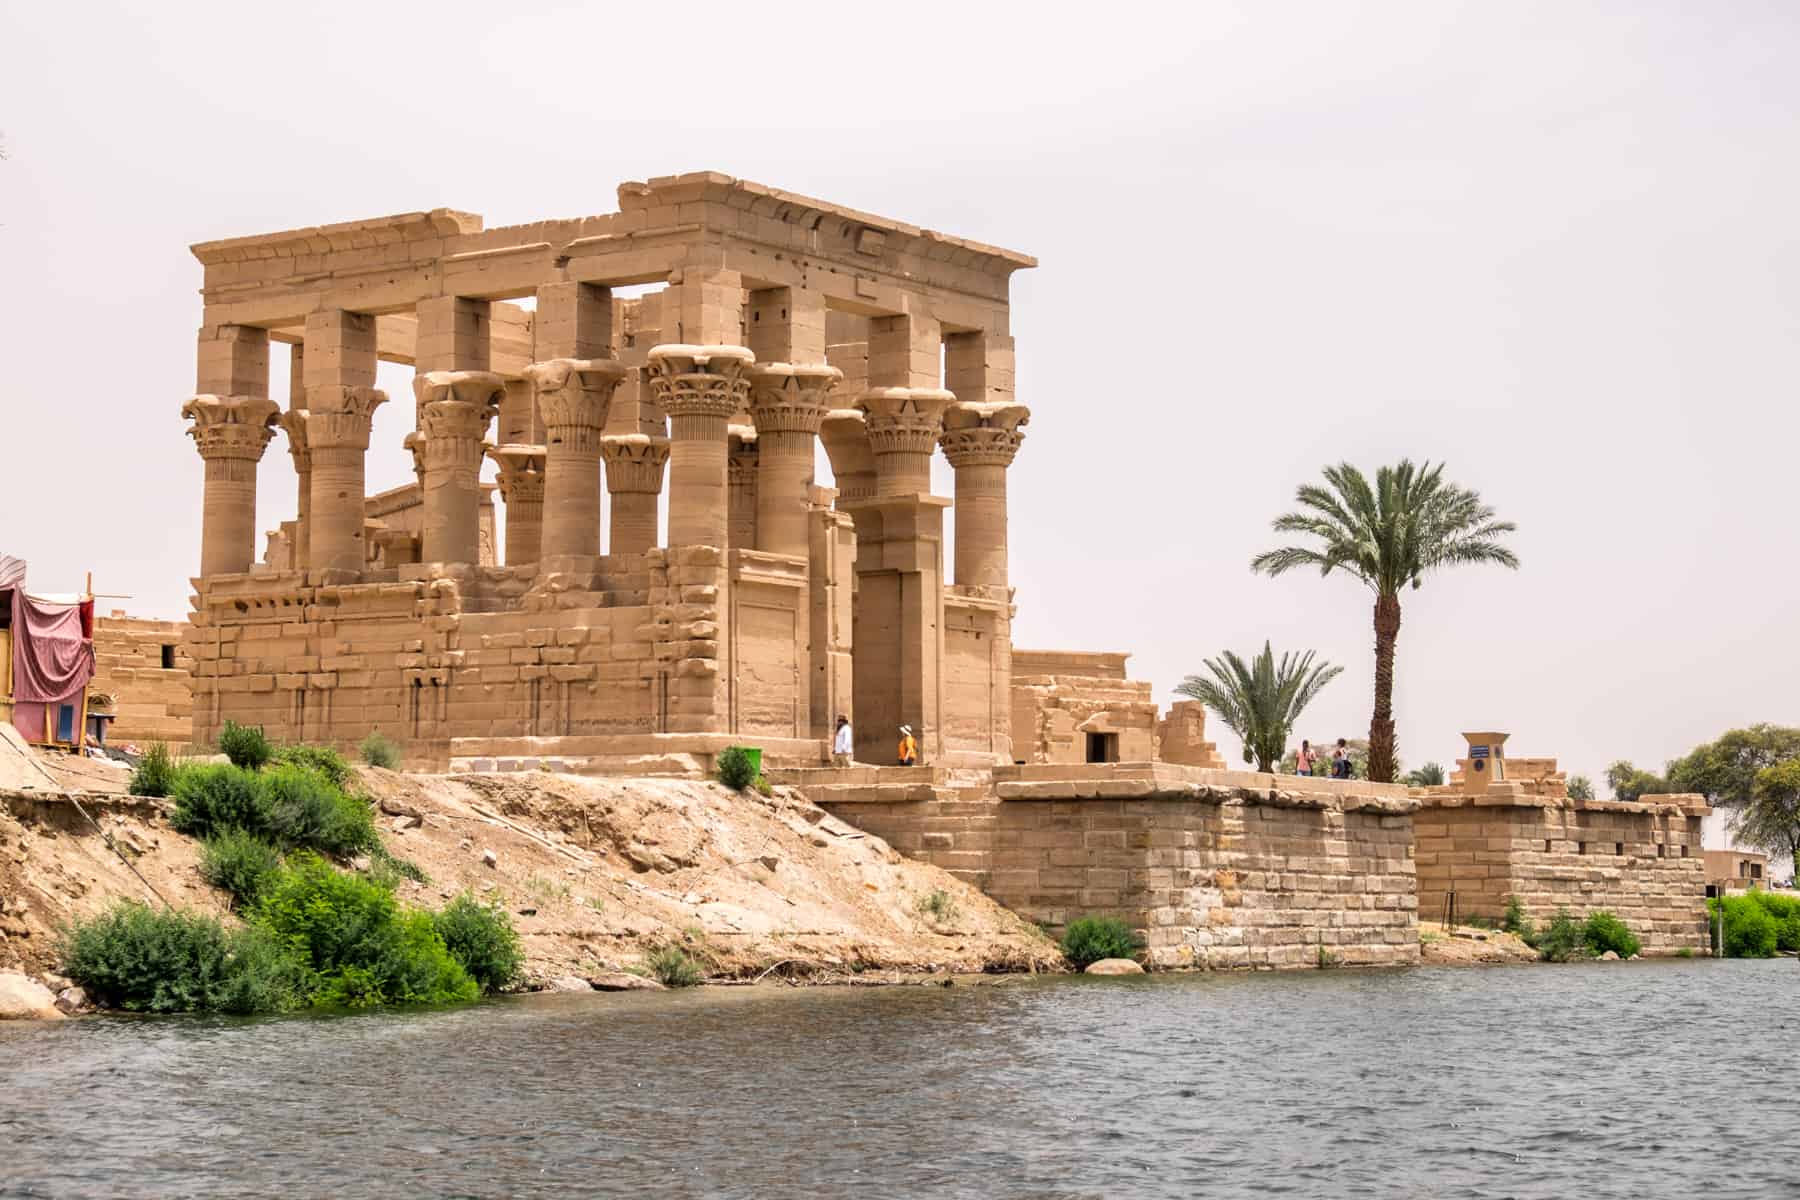 The Greek style column architecture of Philae Temple in Aswan, Egypt as seen from the river you need to cross to access it